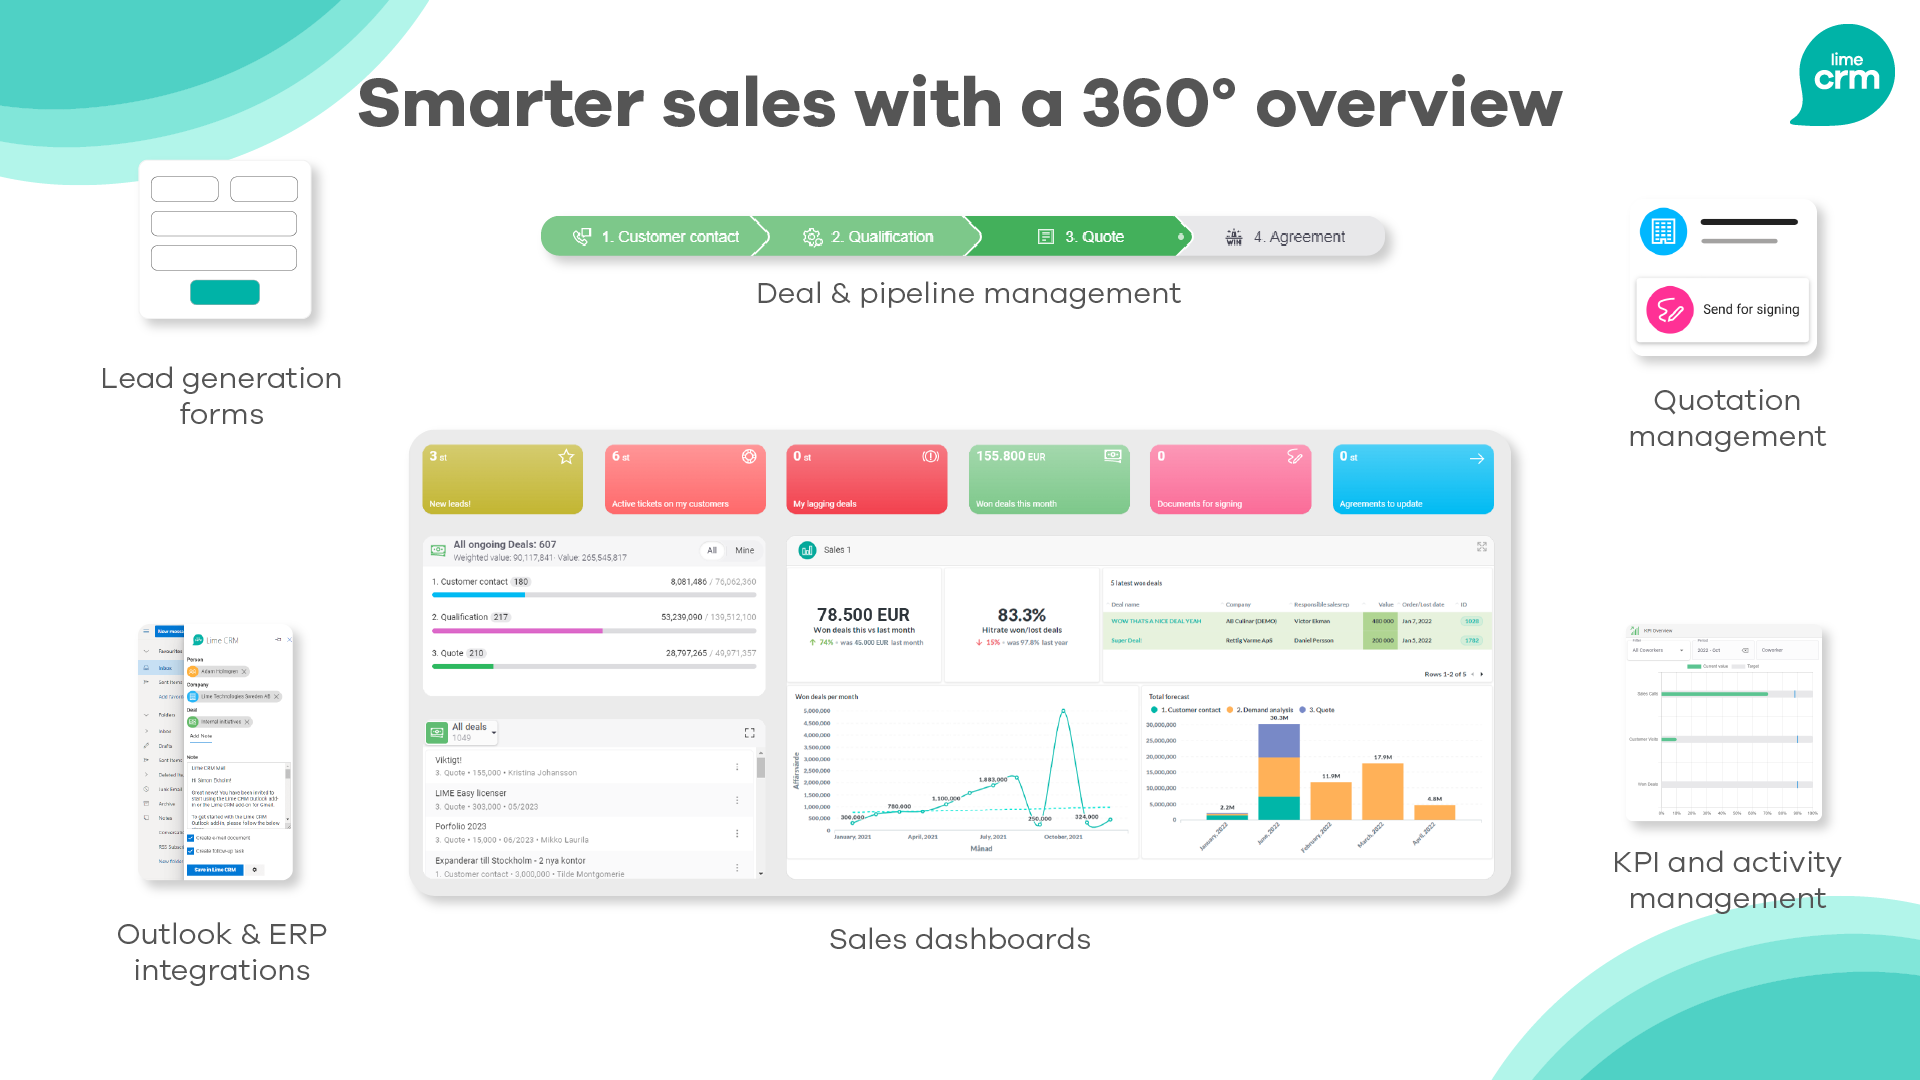 With access to all customer data in one place, Lime CRM works as a one-stop shop for your sales team. Stay on top of your pipeline with a visual dashboard presenting your current activities, prospects, and critical KPIs.